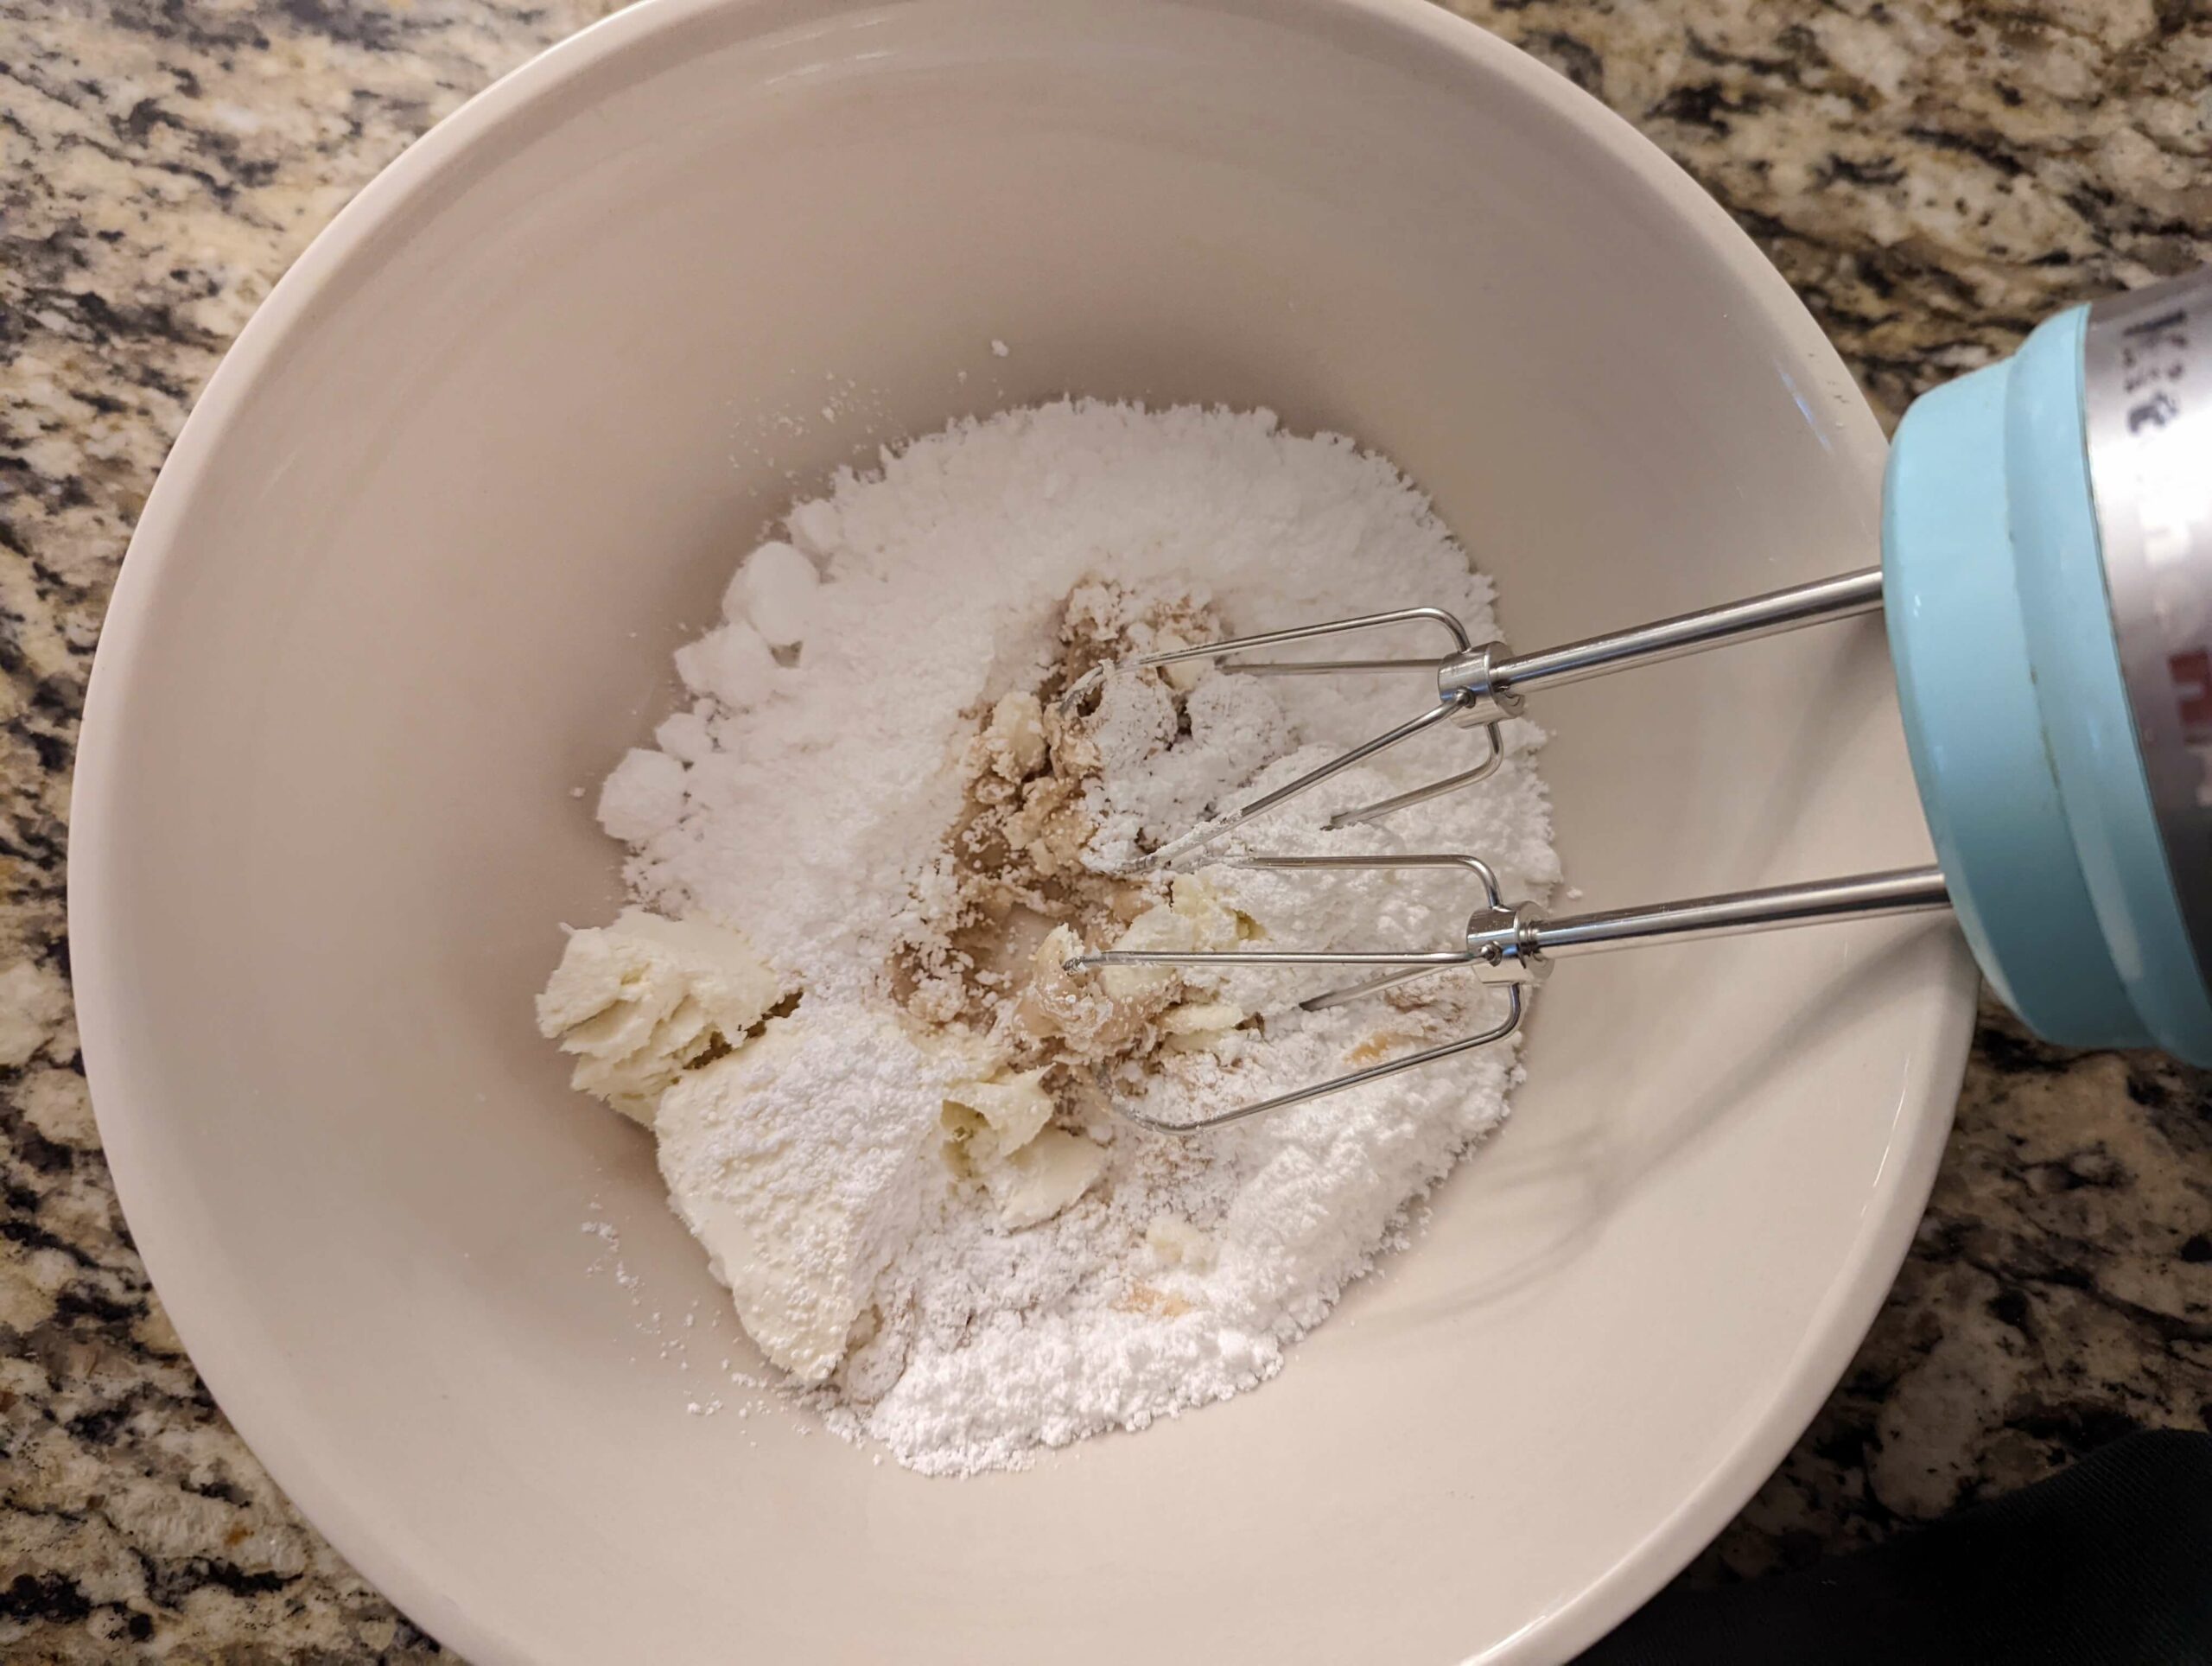 Combine the ingredients for cream cheese frosting in a mixing bowl.